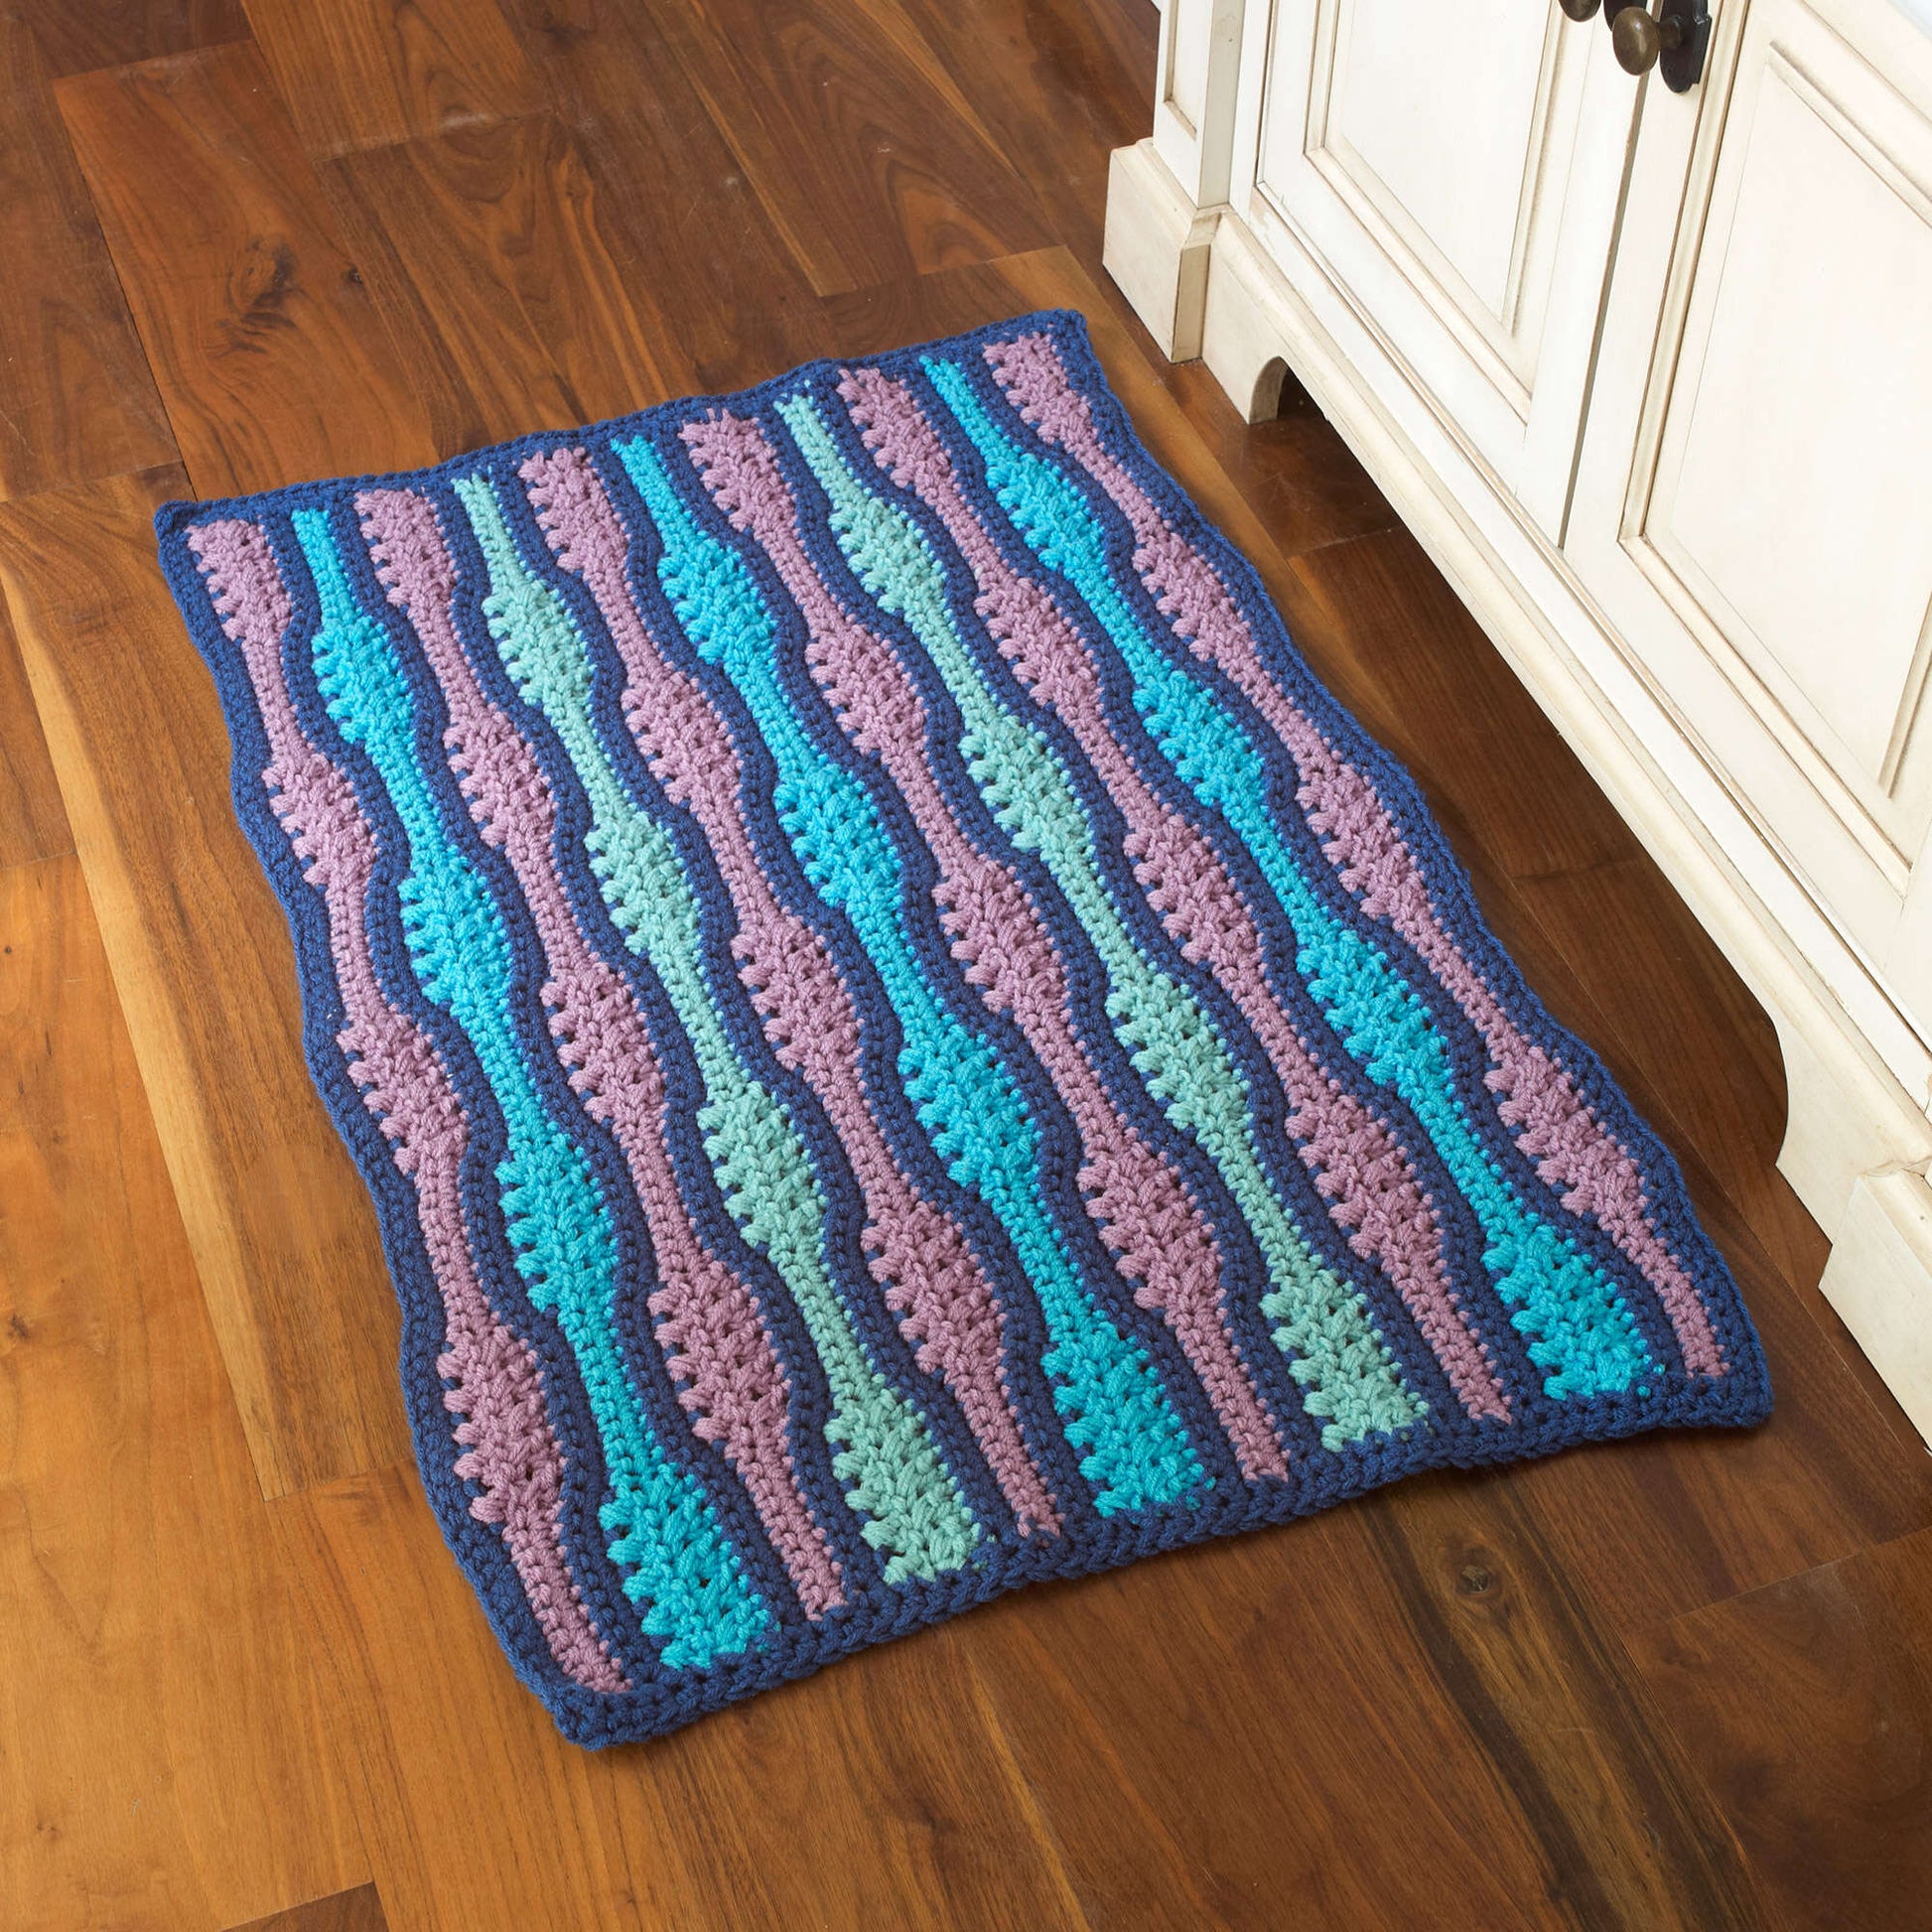 Free Red Heart Crochet Textured Waves Rug Pattern